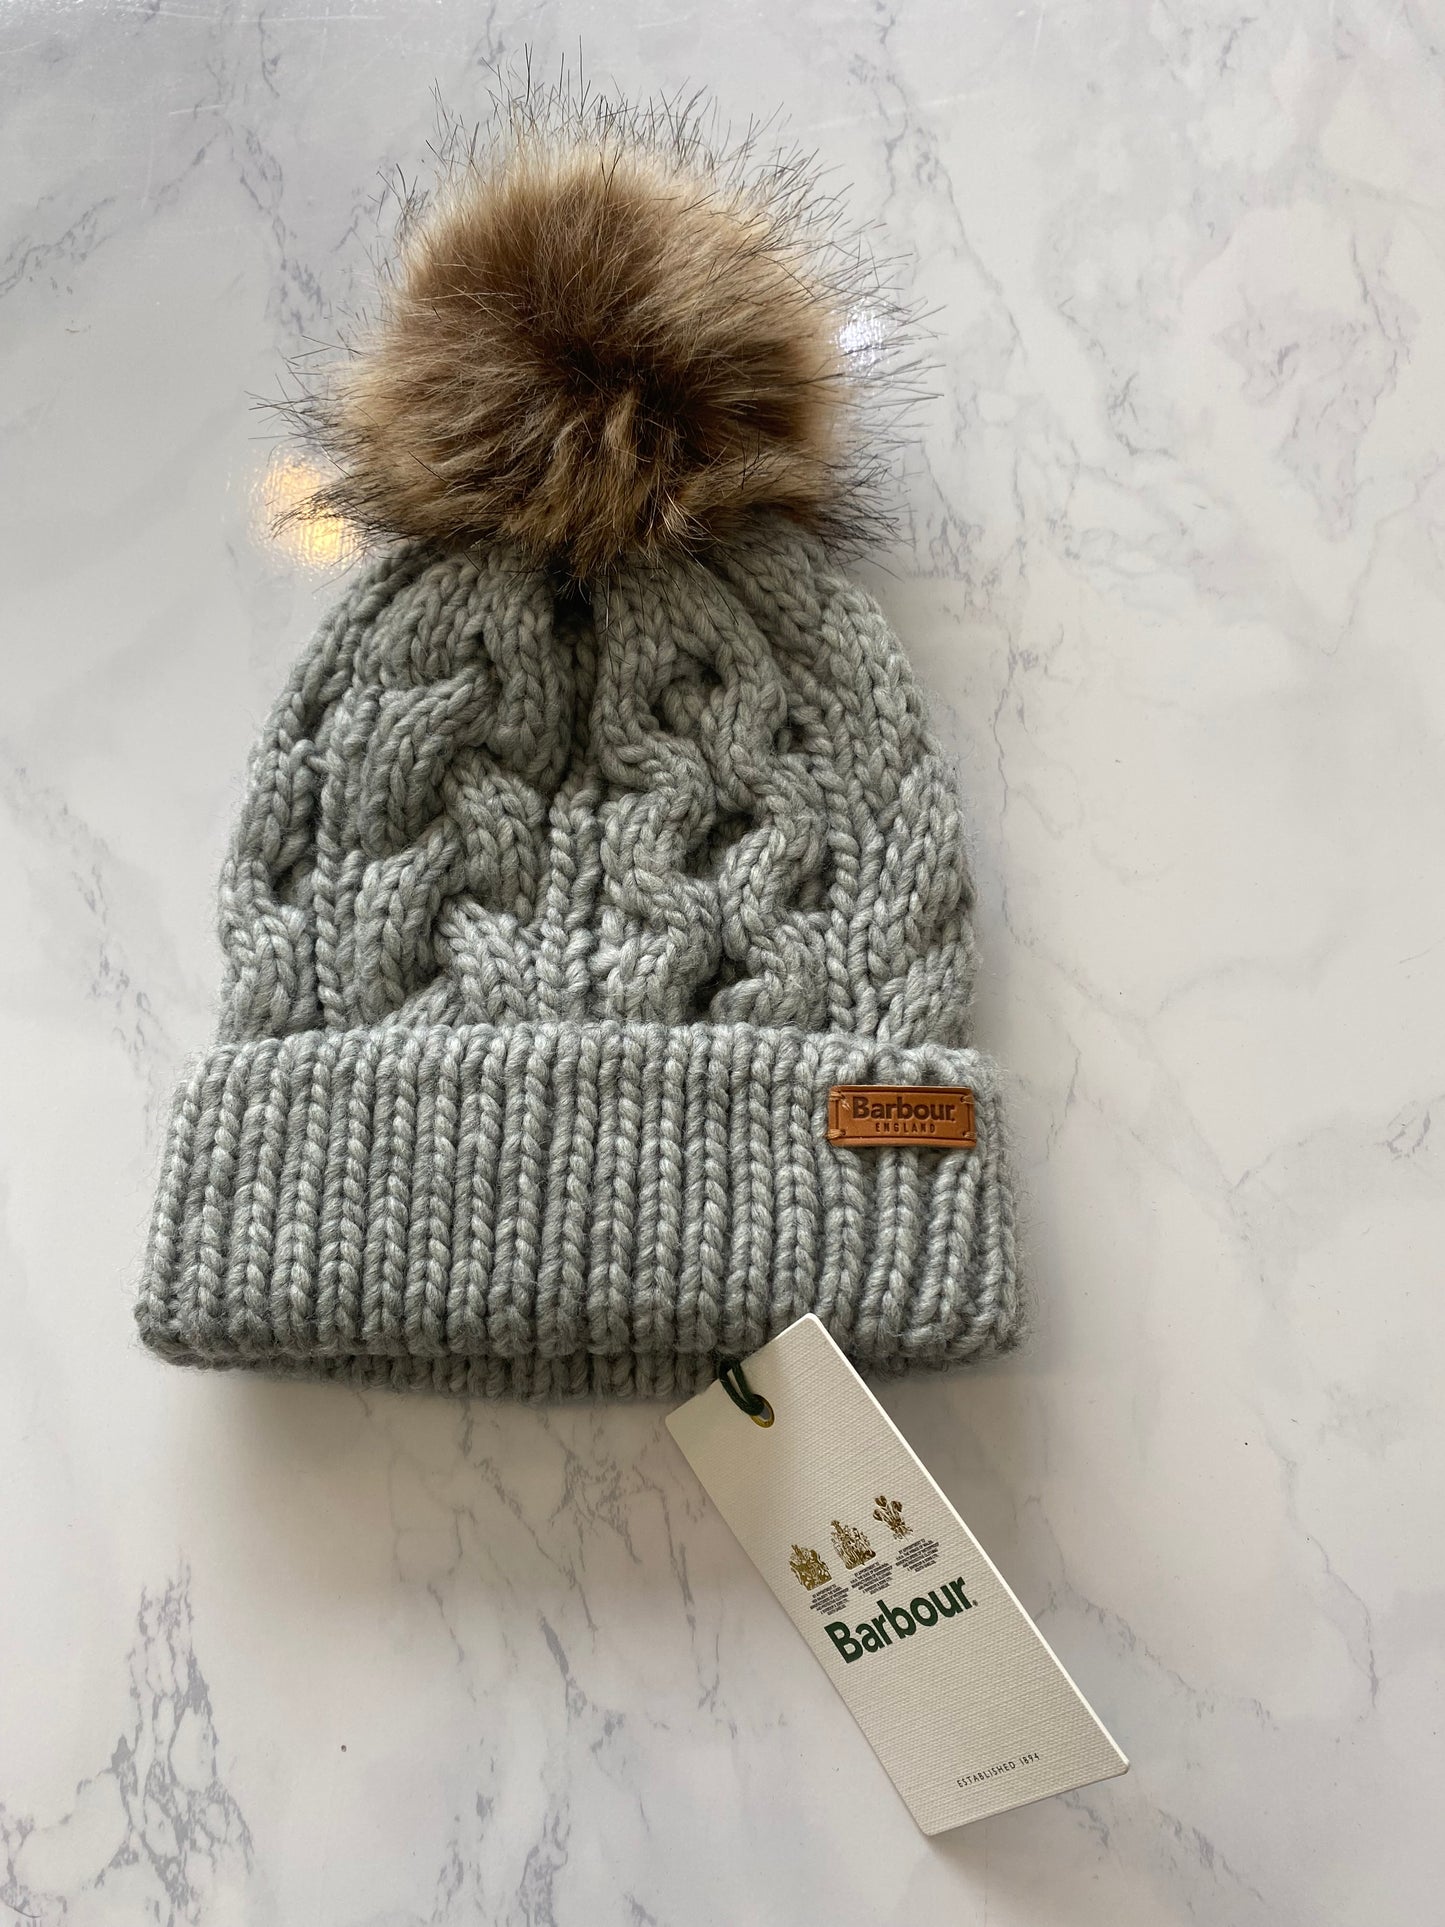 Barbour Grey Knit Bobble Hat Brand New